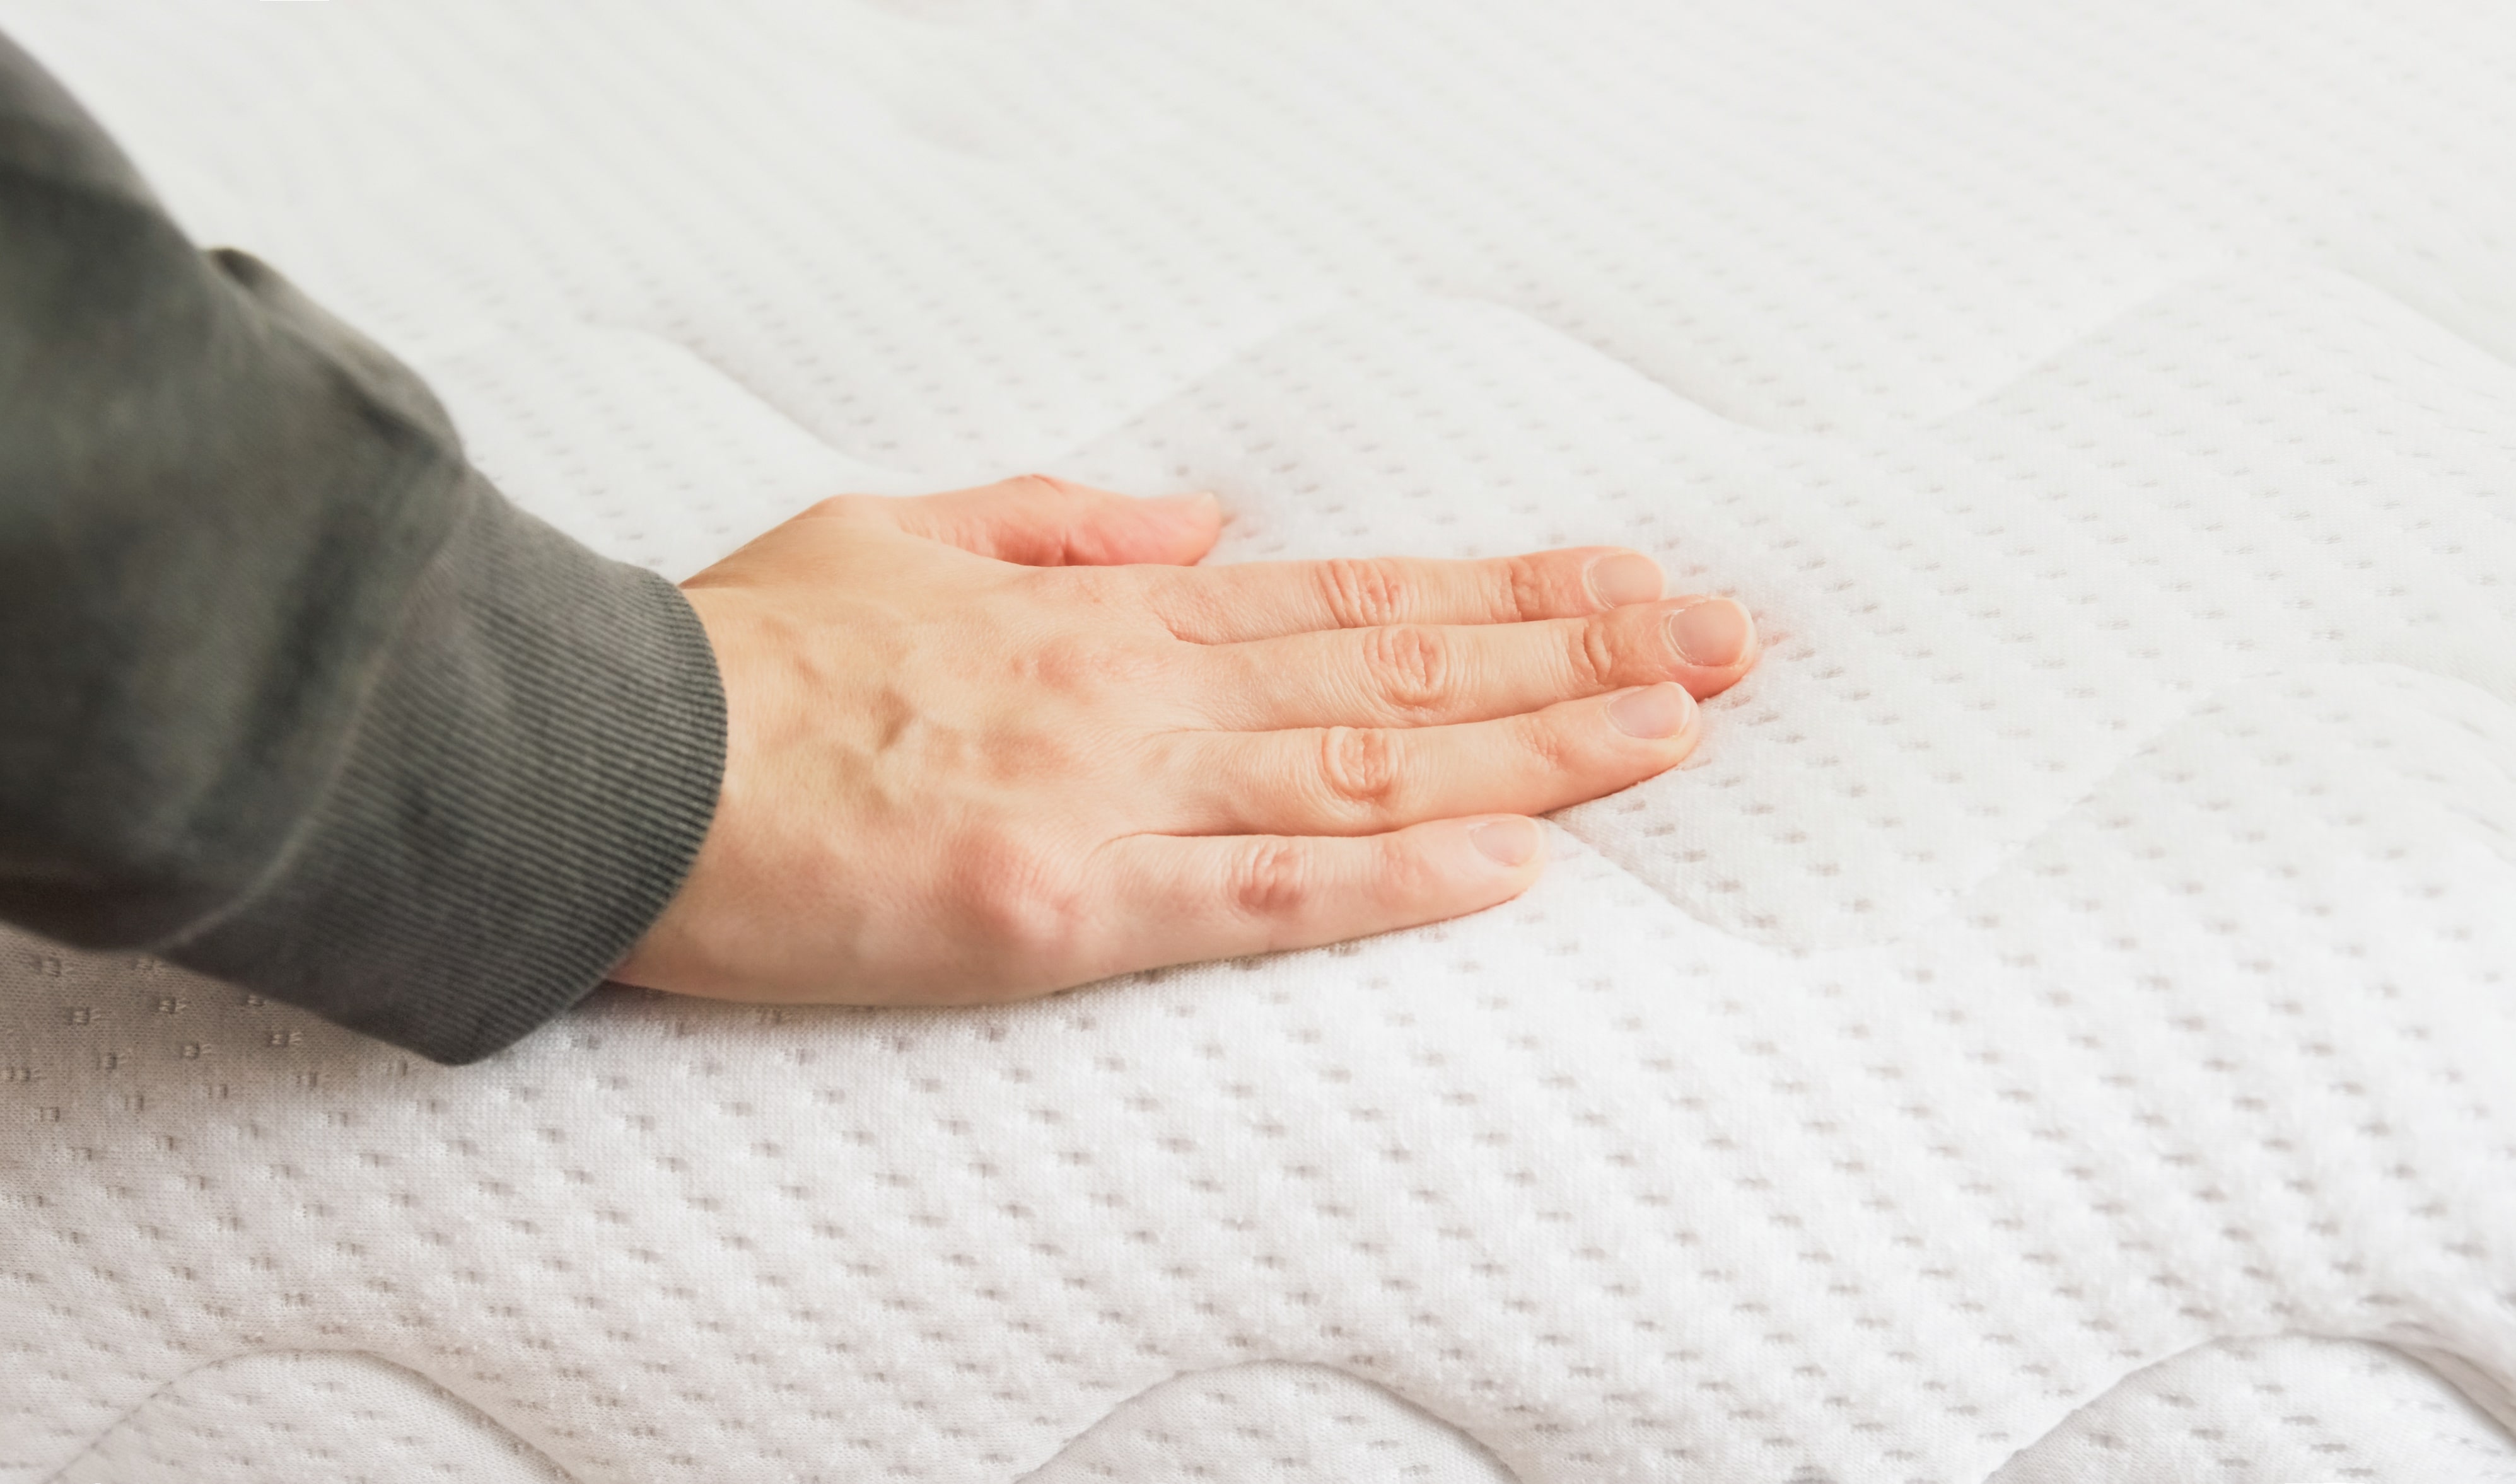 A person pushing on a mattress to test out the firmness and comfort level of it.